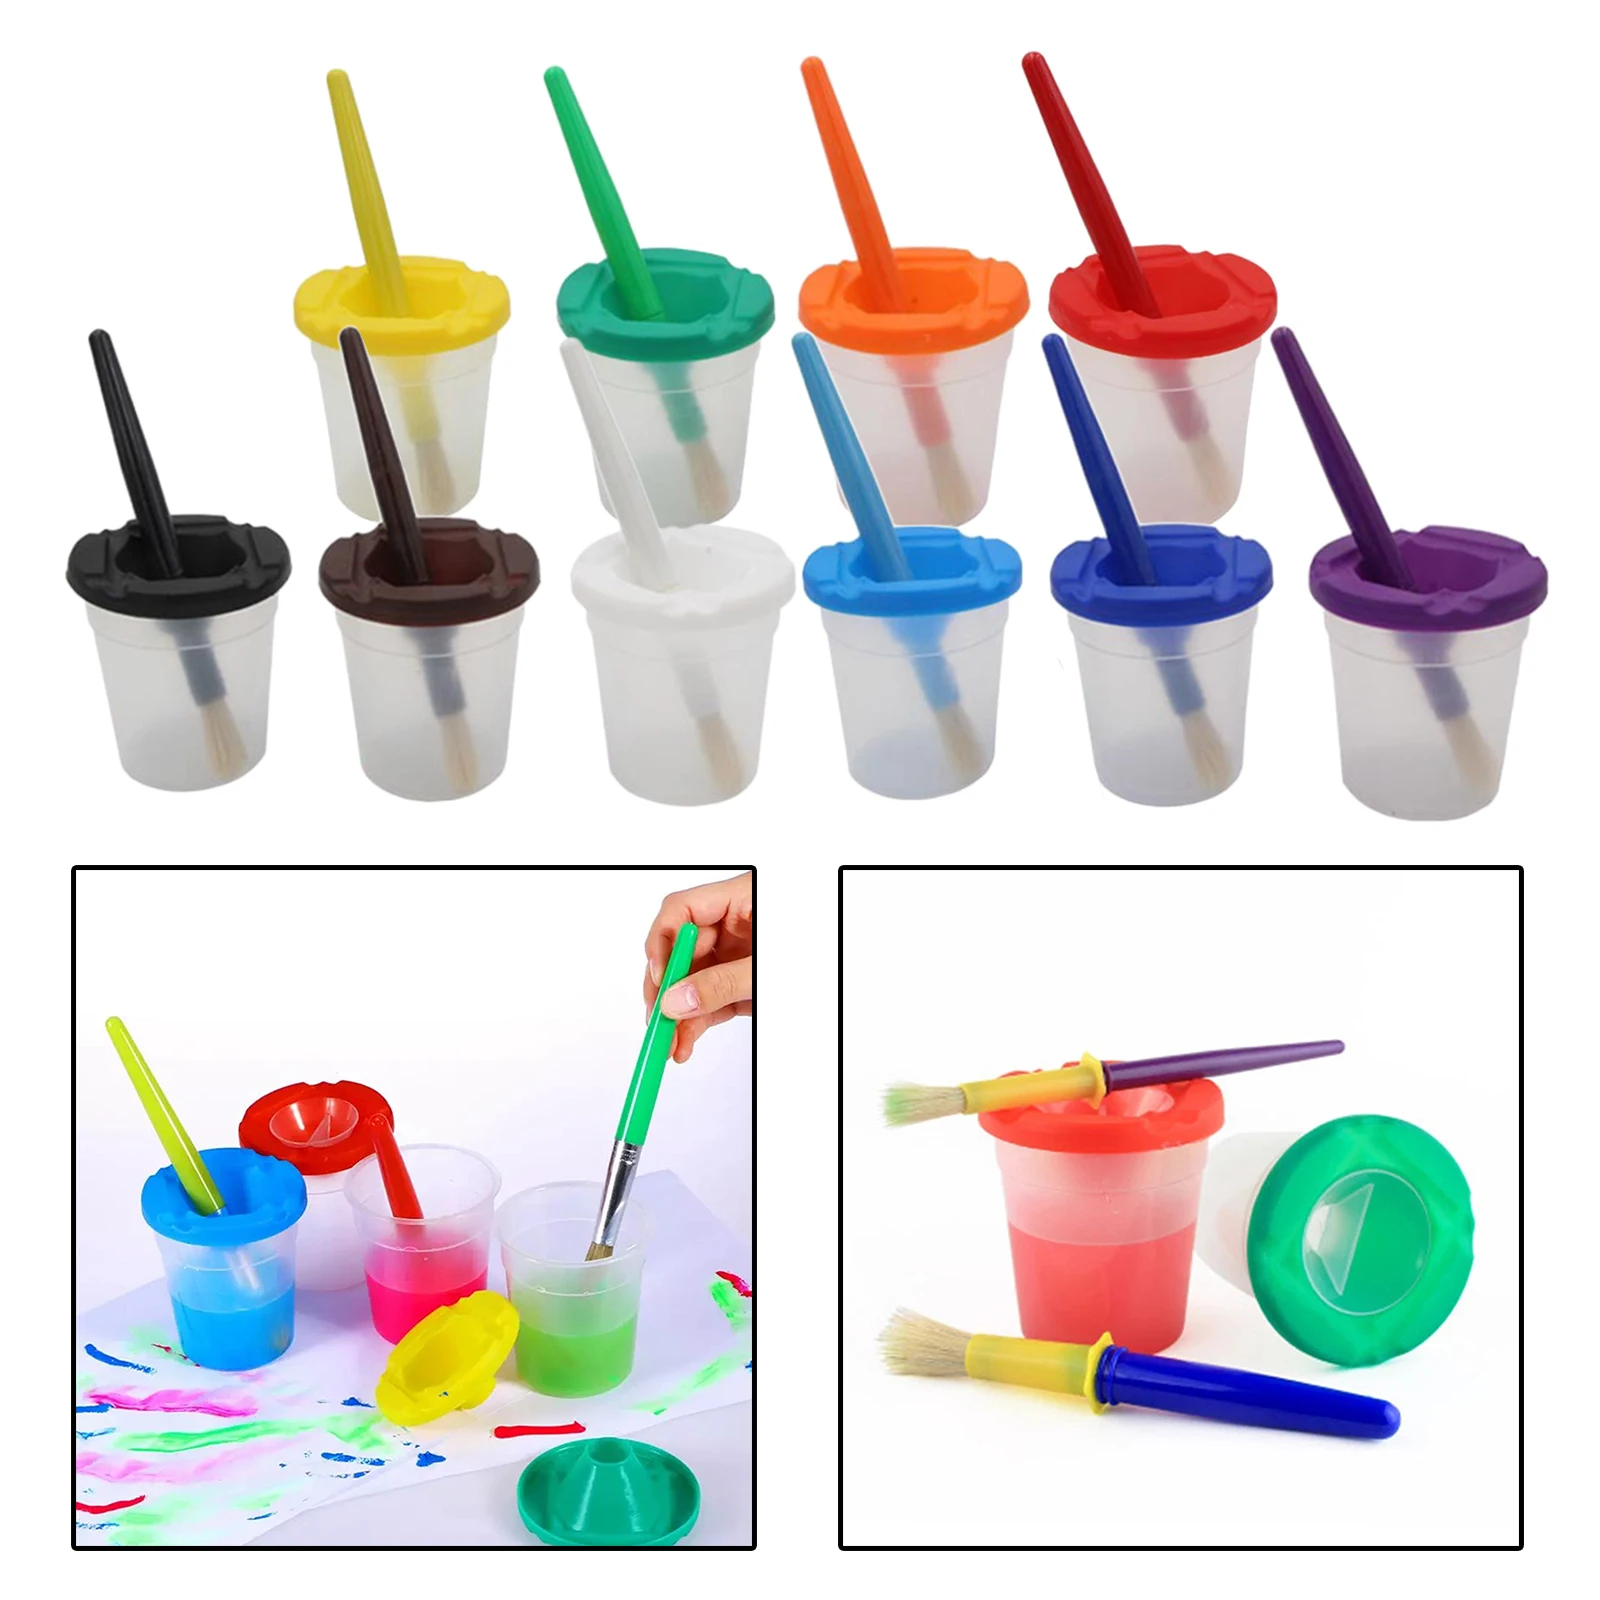 4pcs Paint Brushes And 4pcs No Spill Paint Cups With Lids For Kids  Beginners Durable Material Corrosion Preventive Convenient - AliExpress